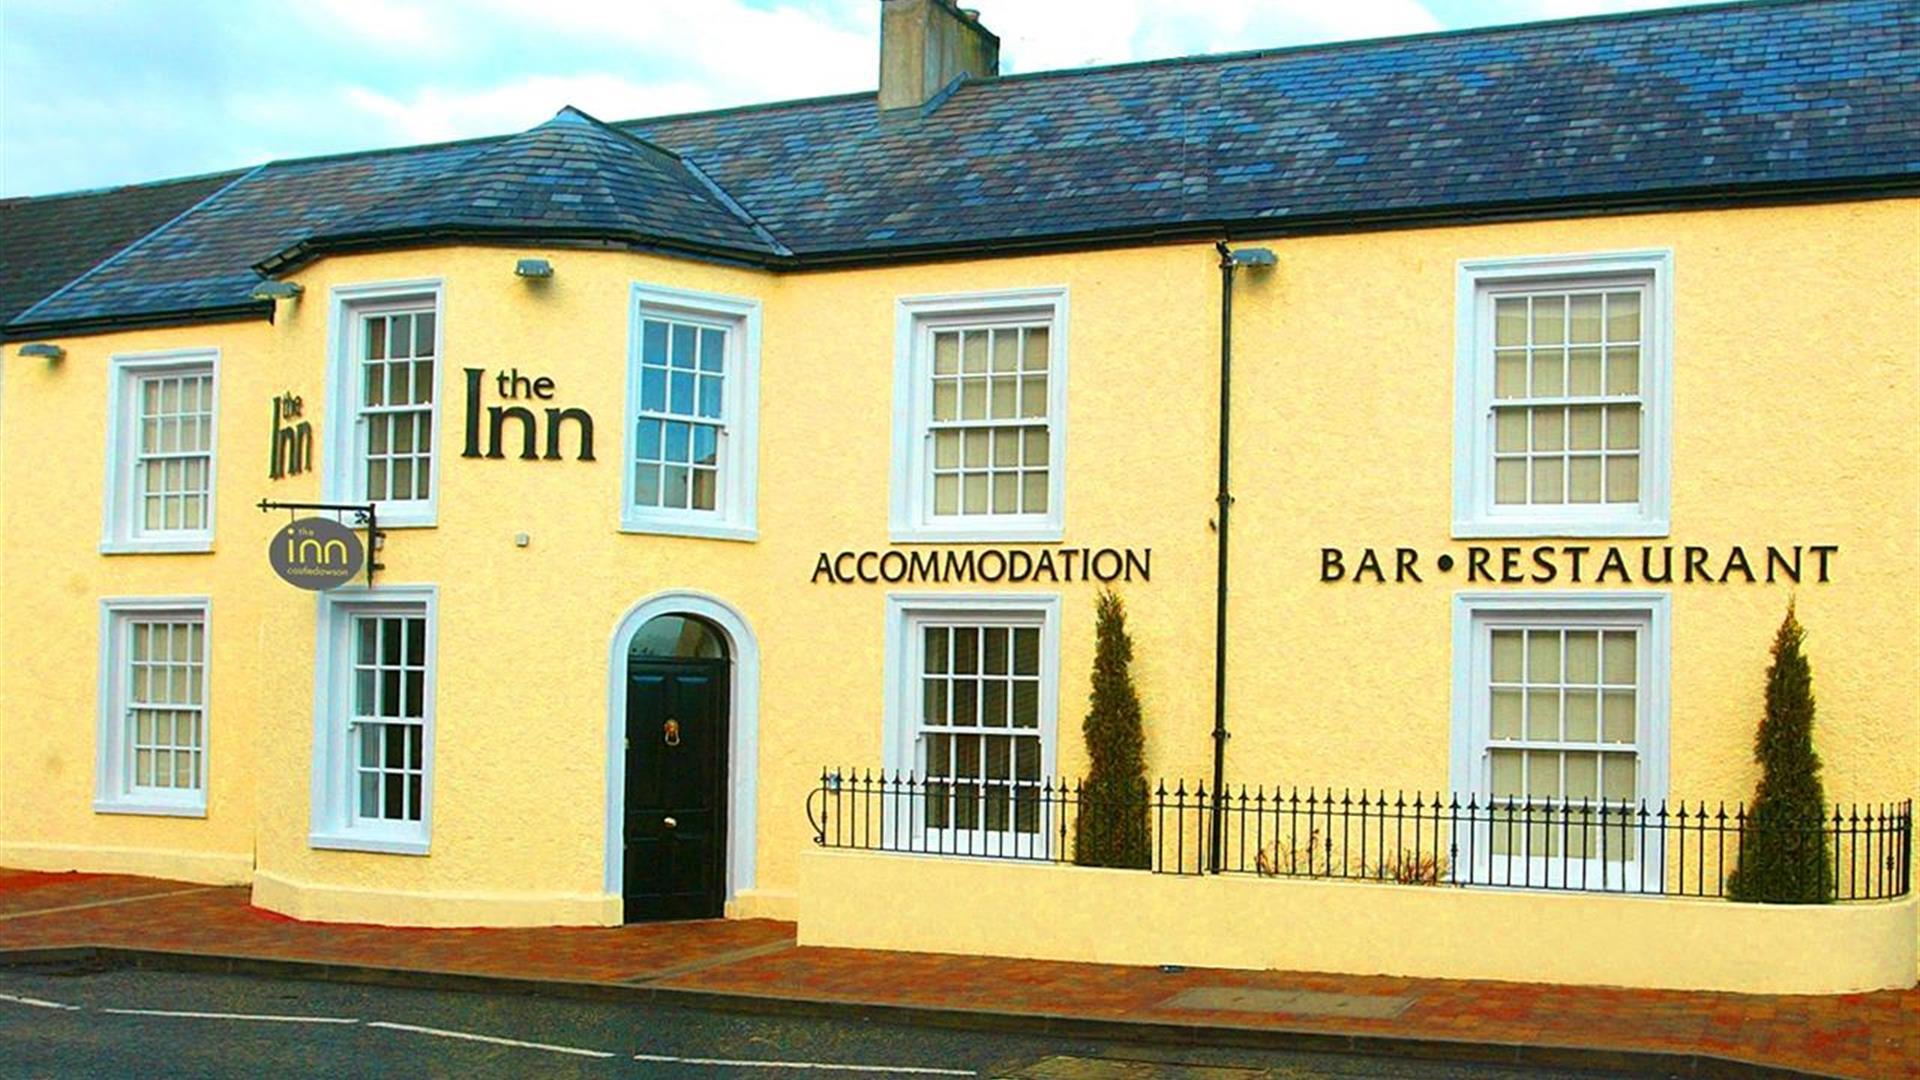 Outside image of The Inn with yellow walls and a black door